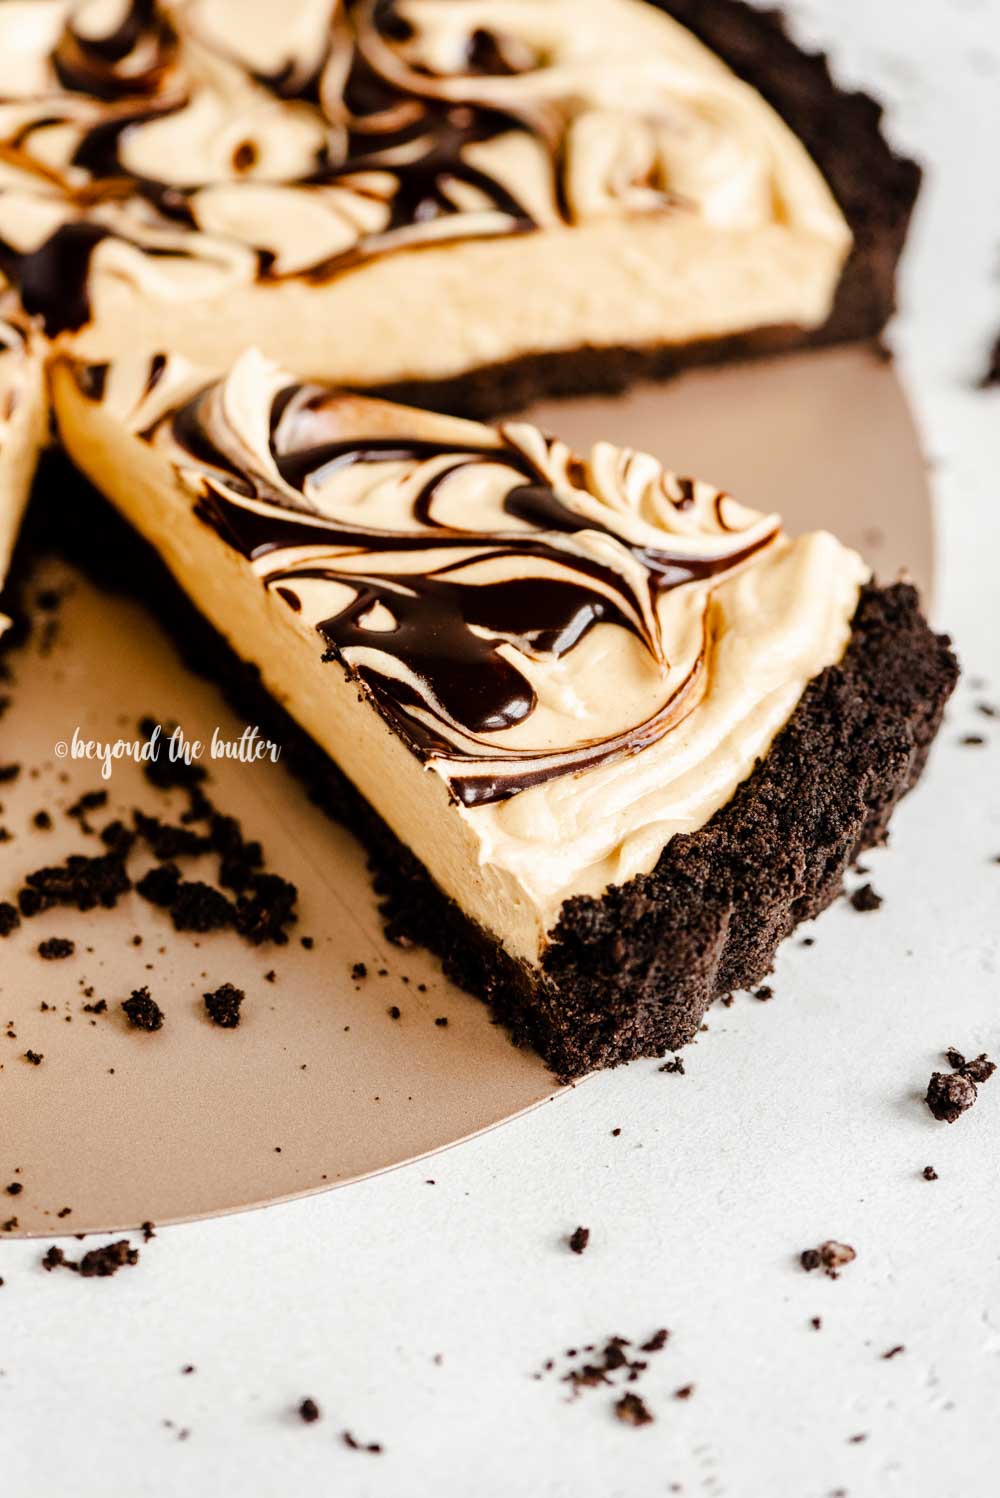 Angled image of a sliced chocolate peanut butter tart | All Images © Beyond the Butter™